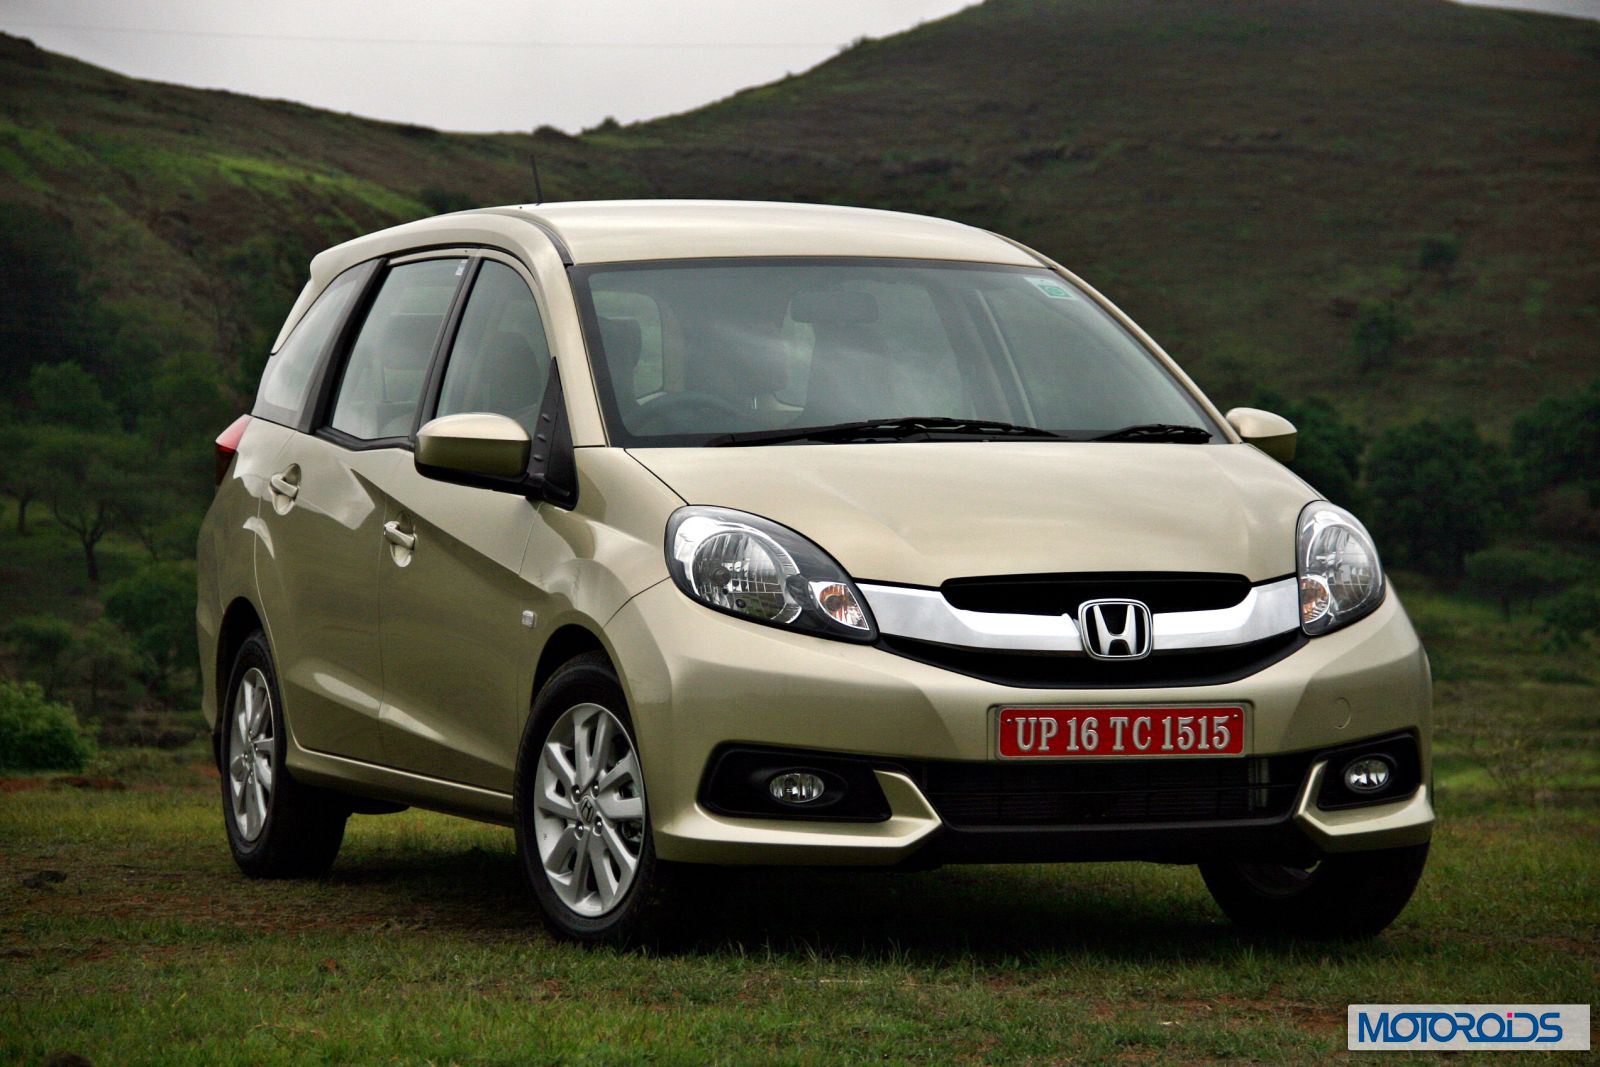  Honda  Mobilio  1 5 iVTEC and 1 5 iDTEC Quick Review with 